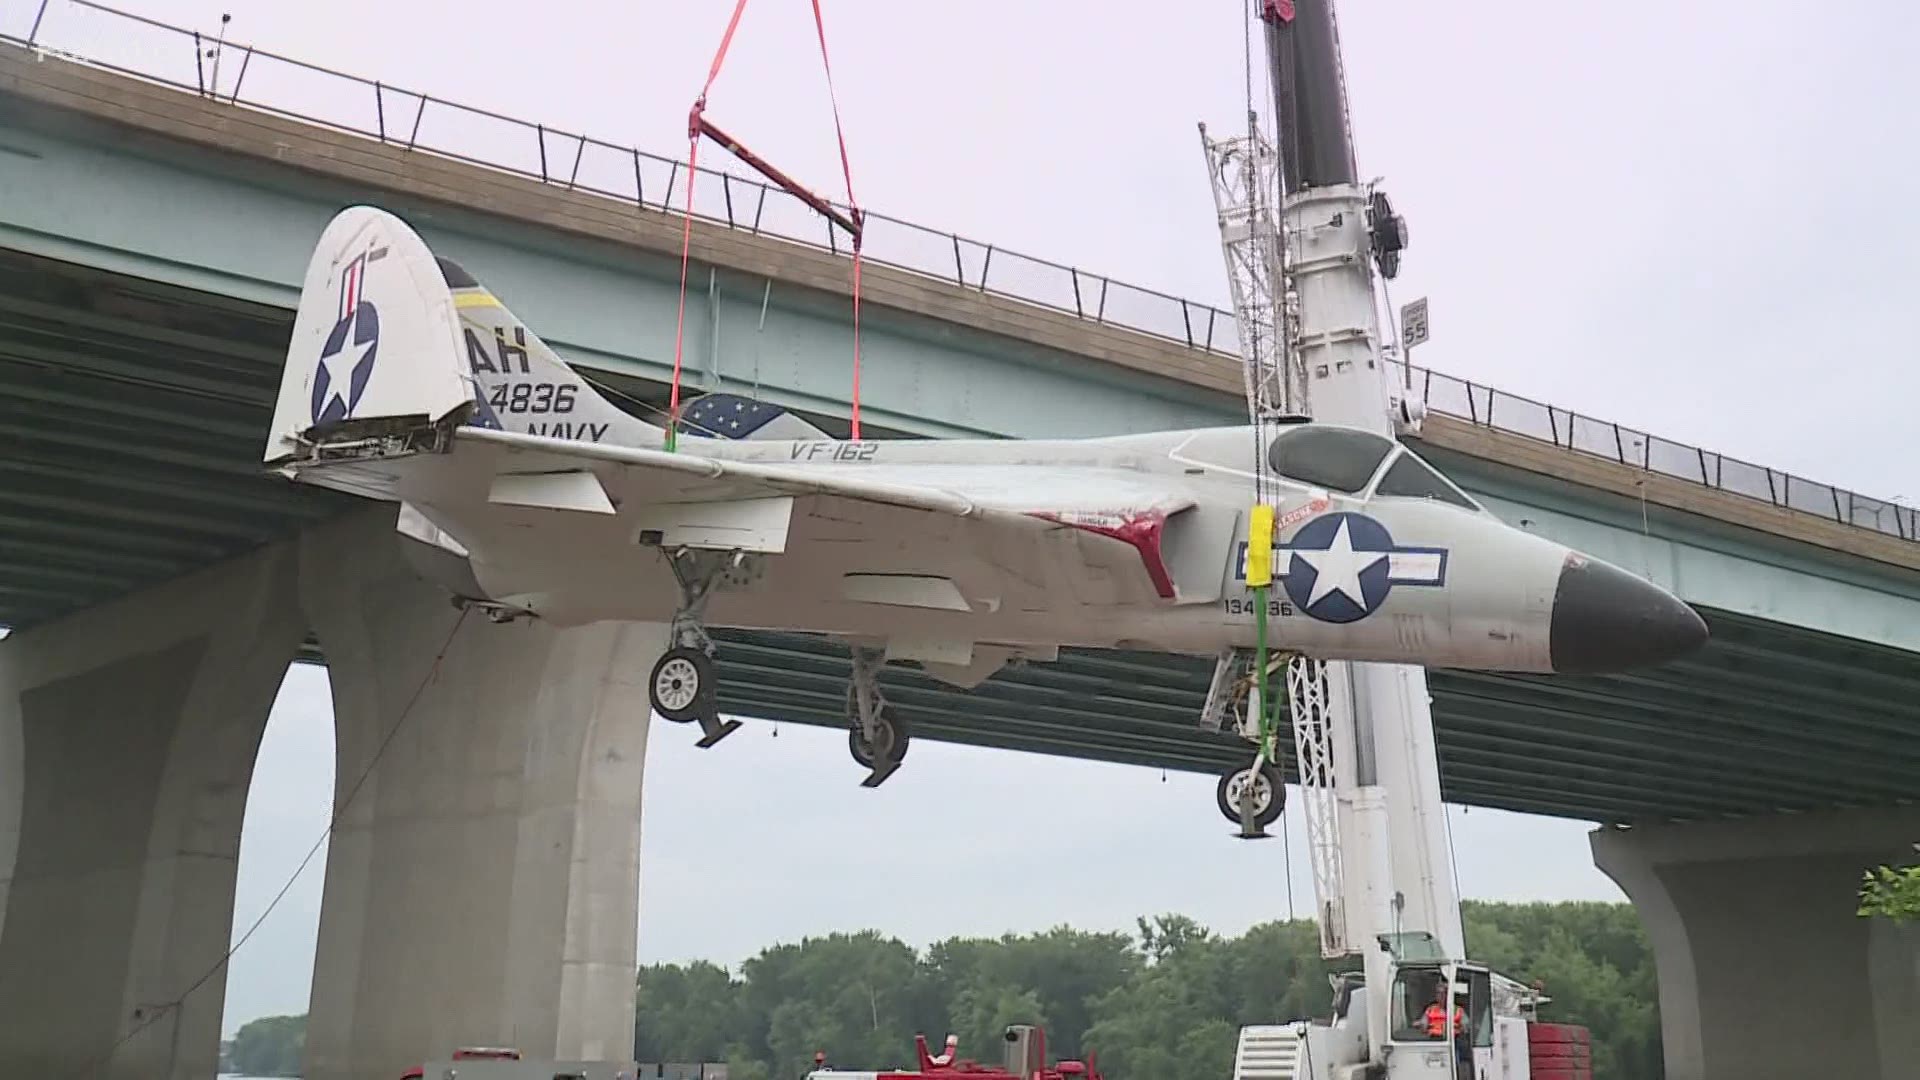 The SkyRay jet fighter has left the New England Air Museum and is headed to the USS Intrepid on the Hudson.